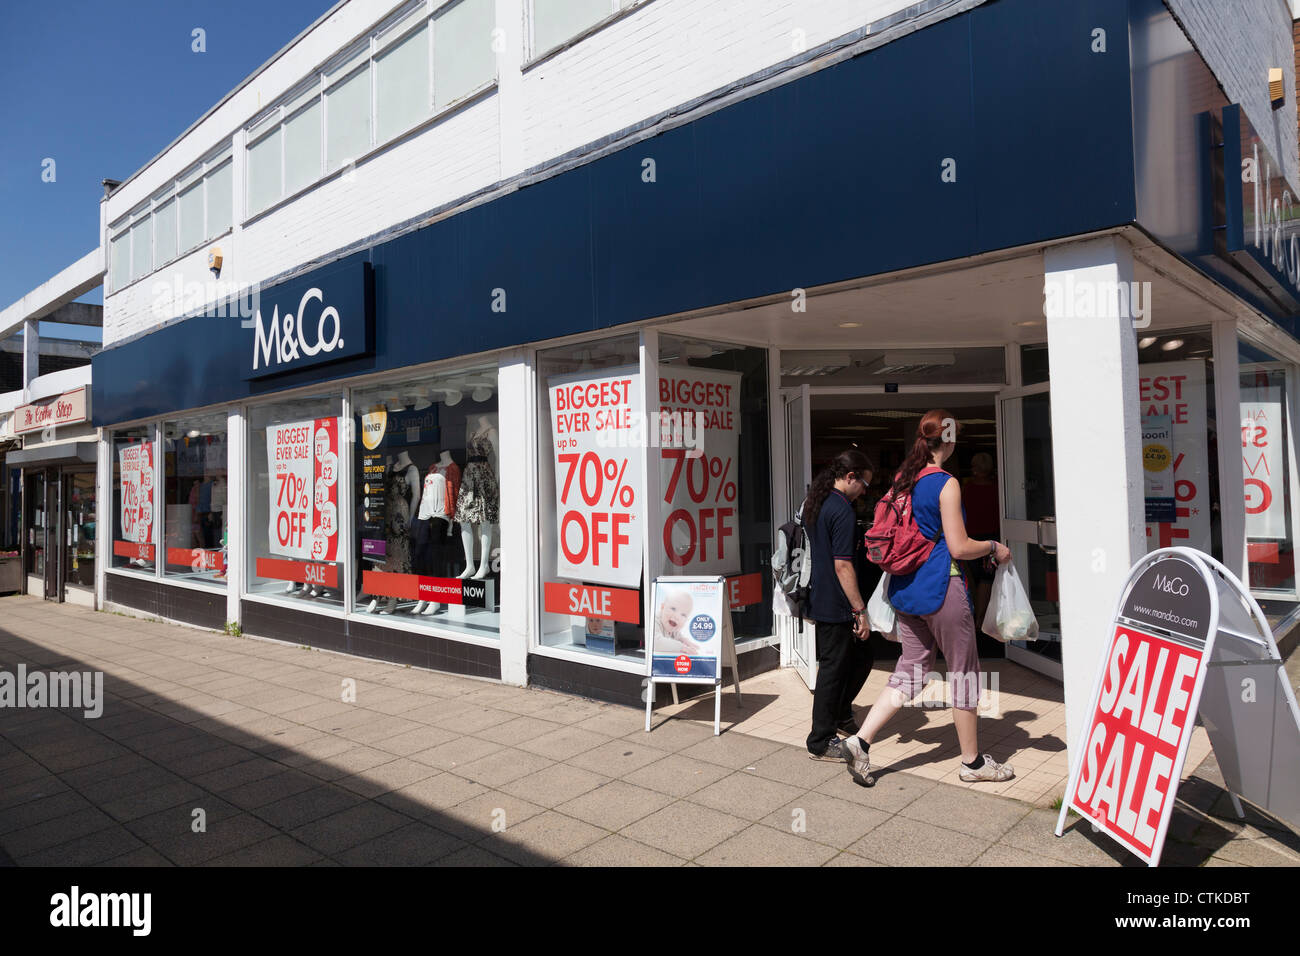 M&Co high street shop front with 70% off sale signs Stock Photo